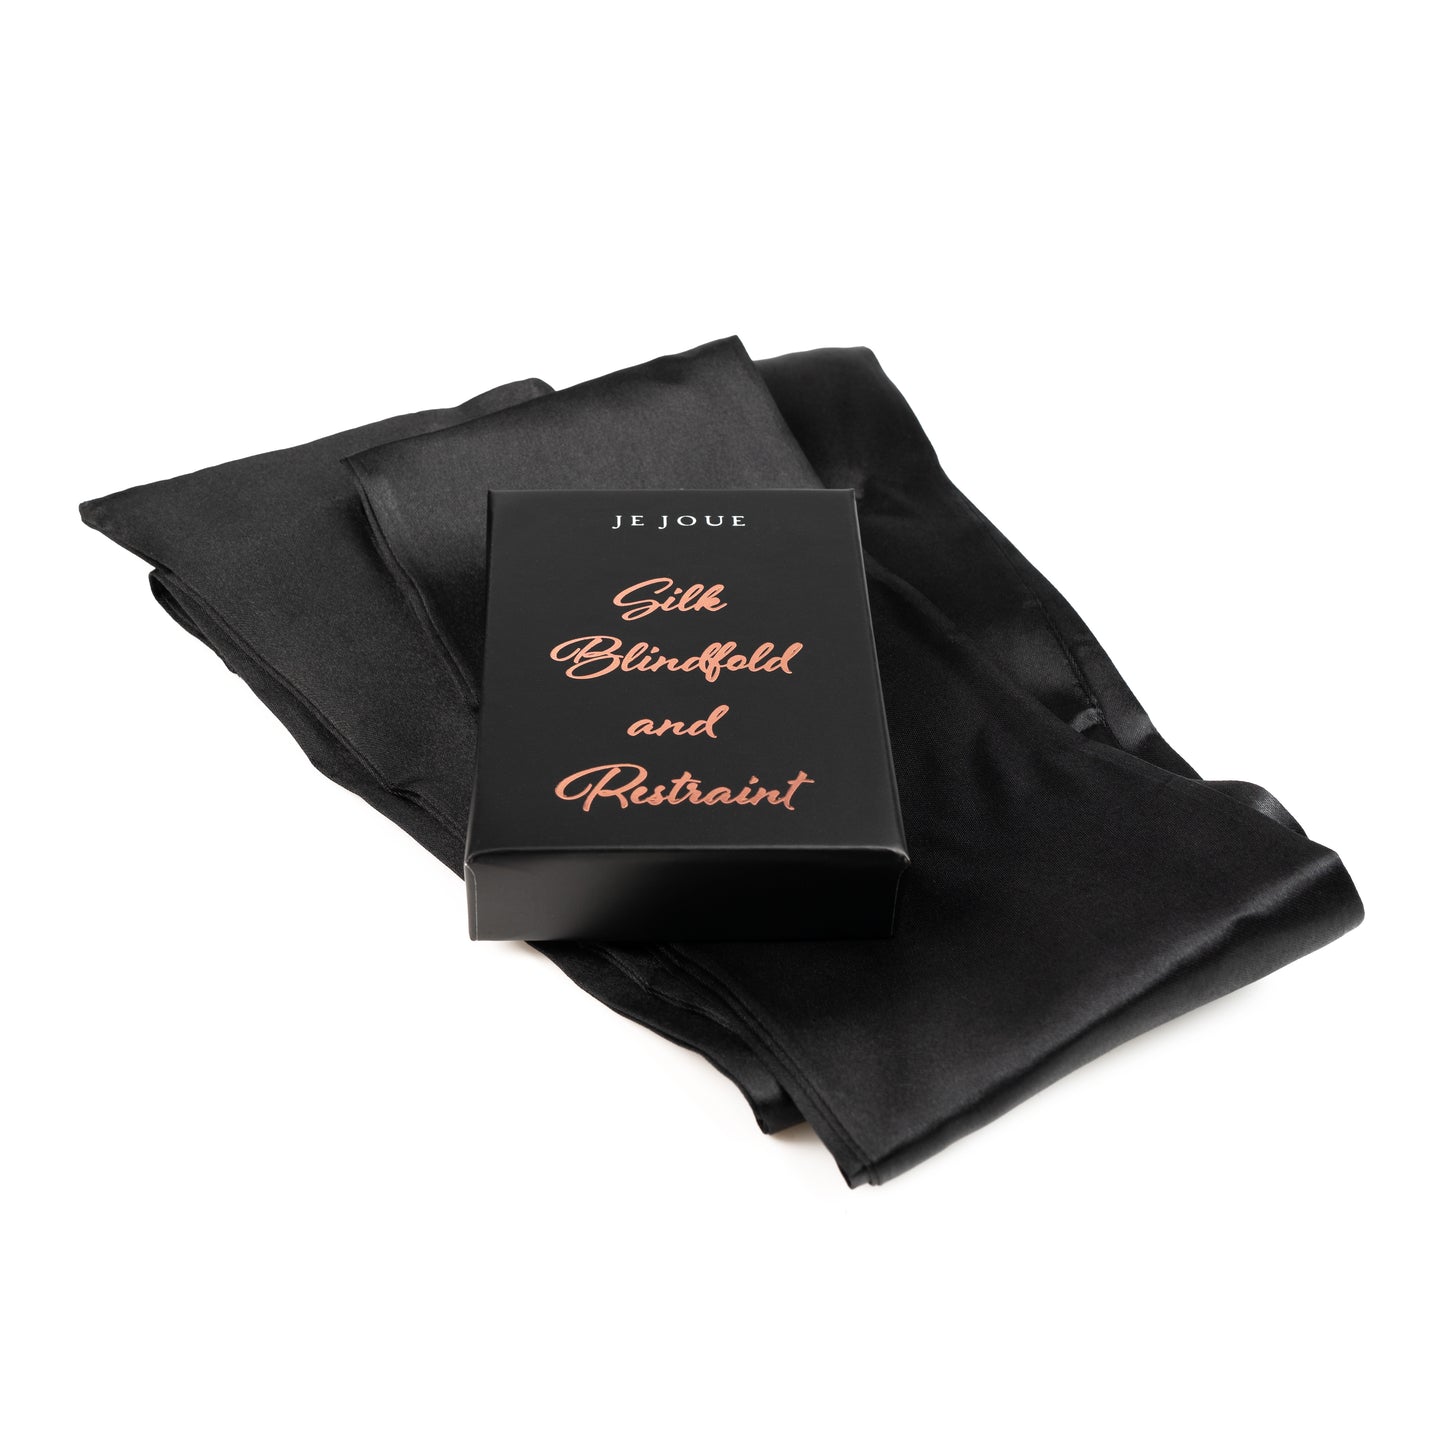 Je Joue black box silk blindfold and restraint with box